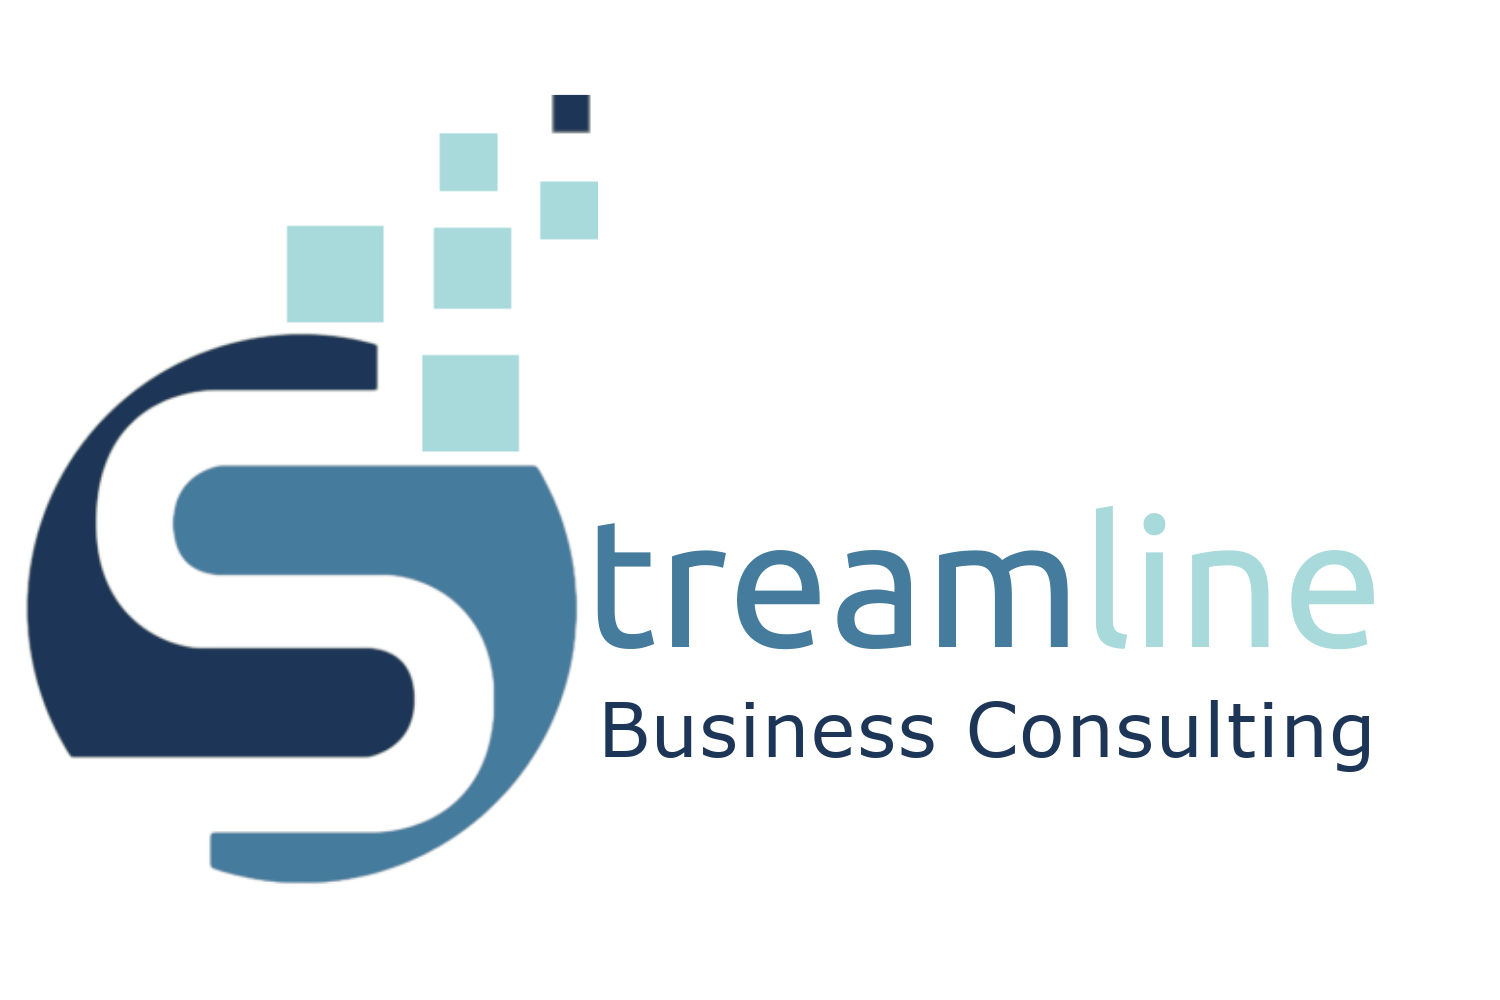 Streamline Business Consulting